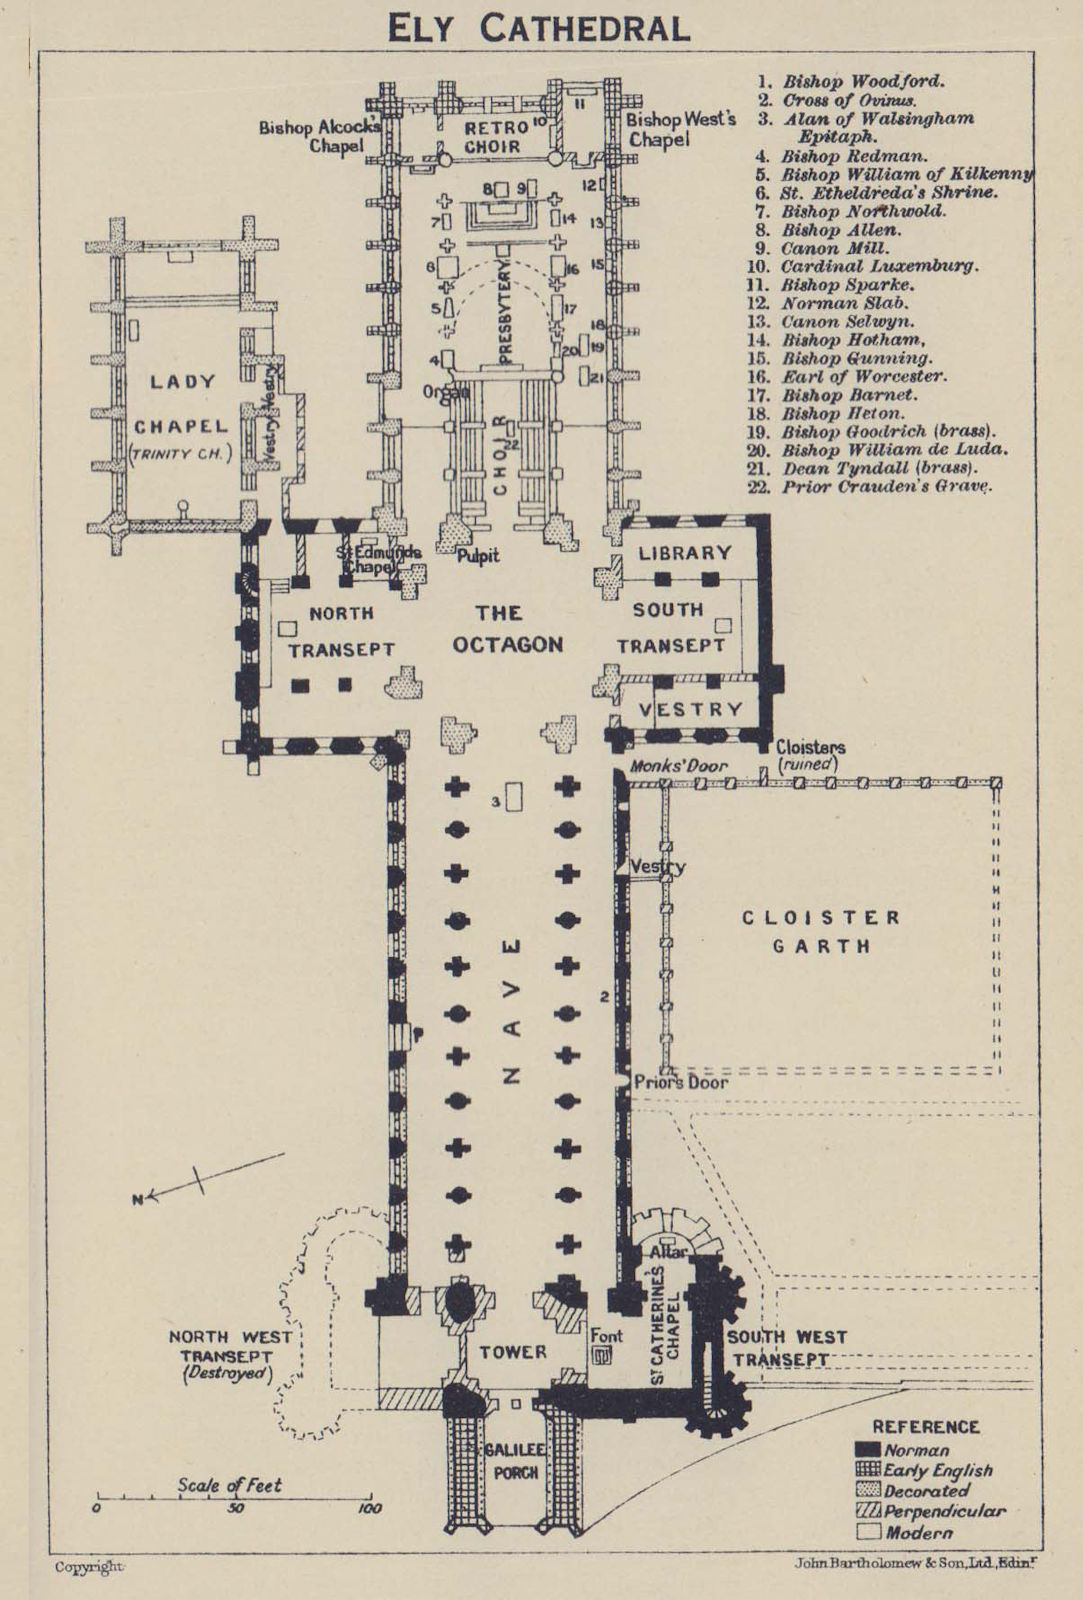 Associate Product Ely Cathedral ground floor plan. Cambridgeshire 1920 old antique map chart